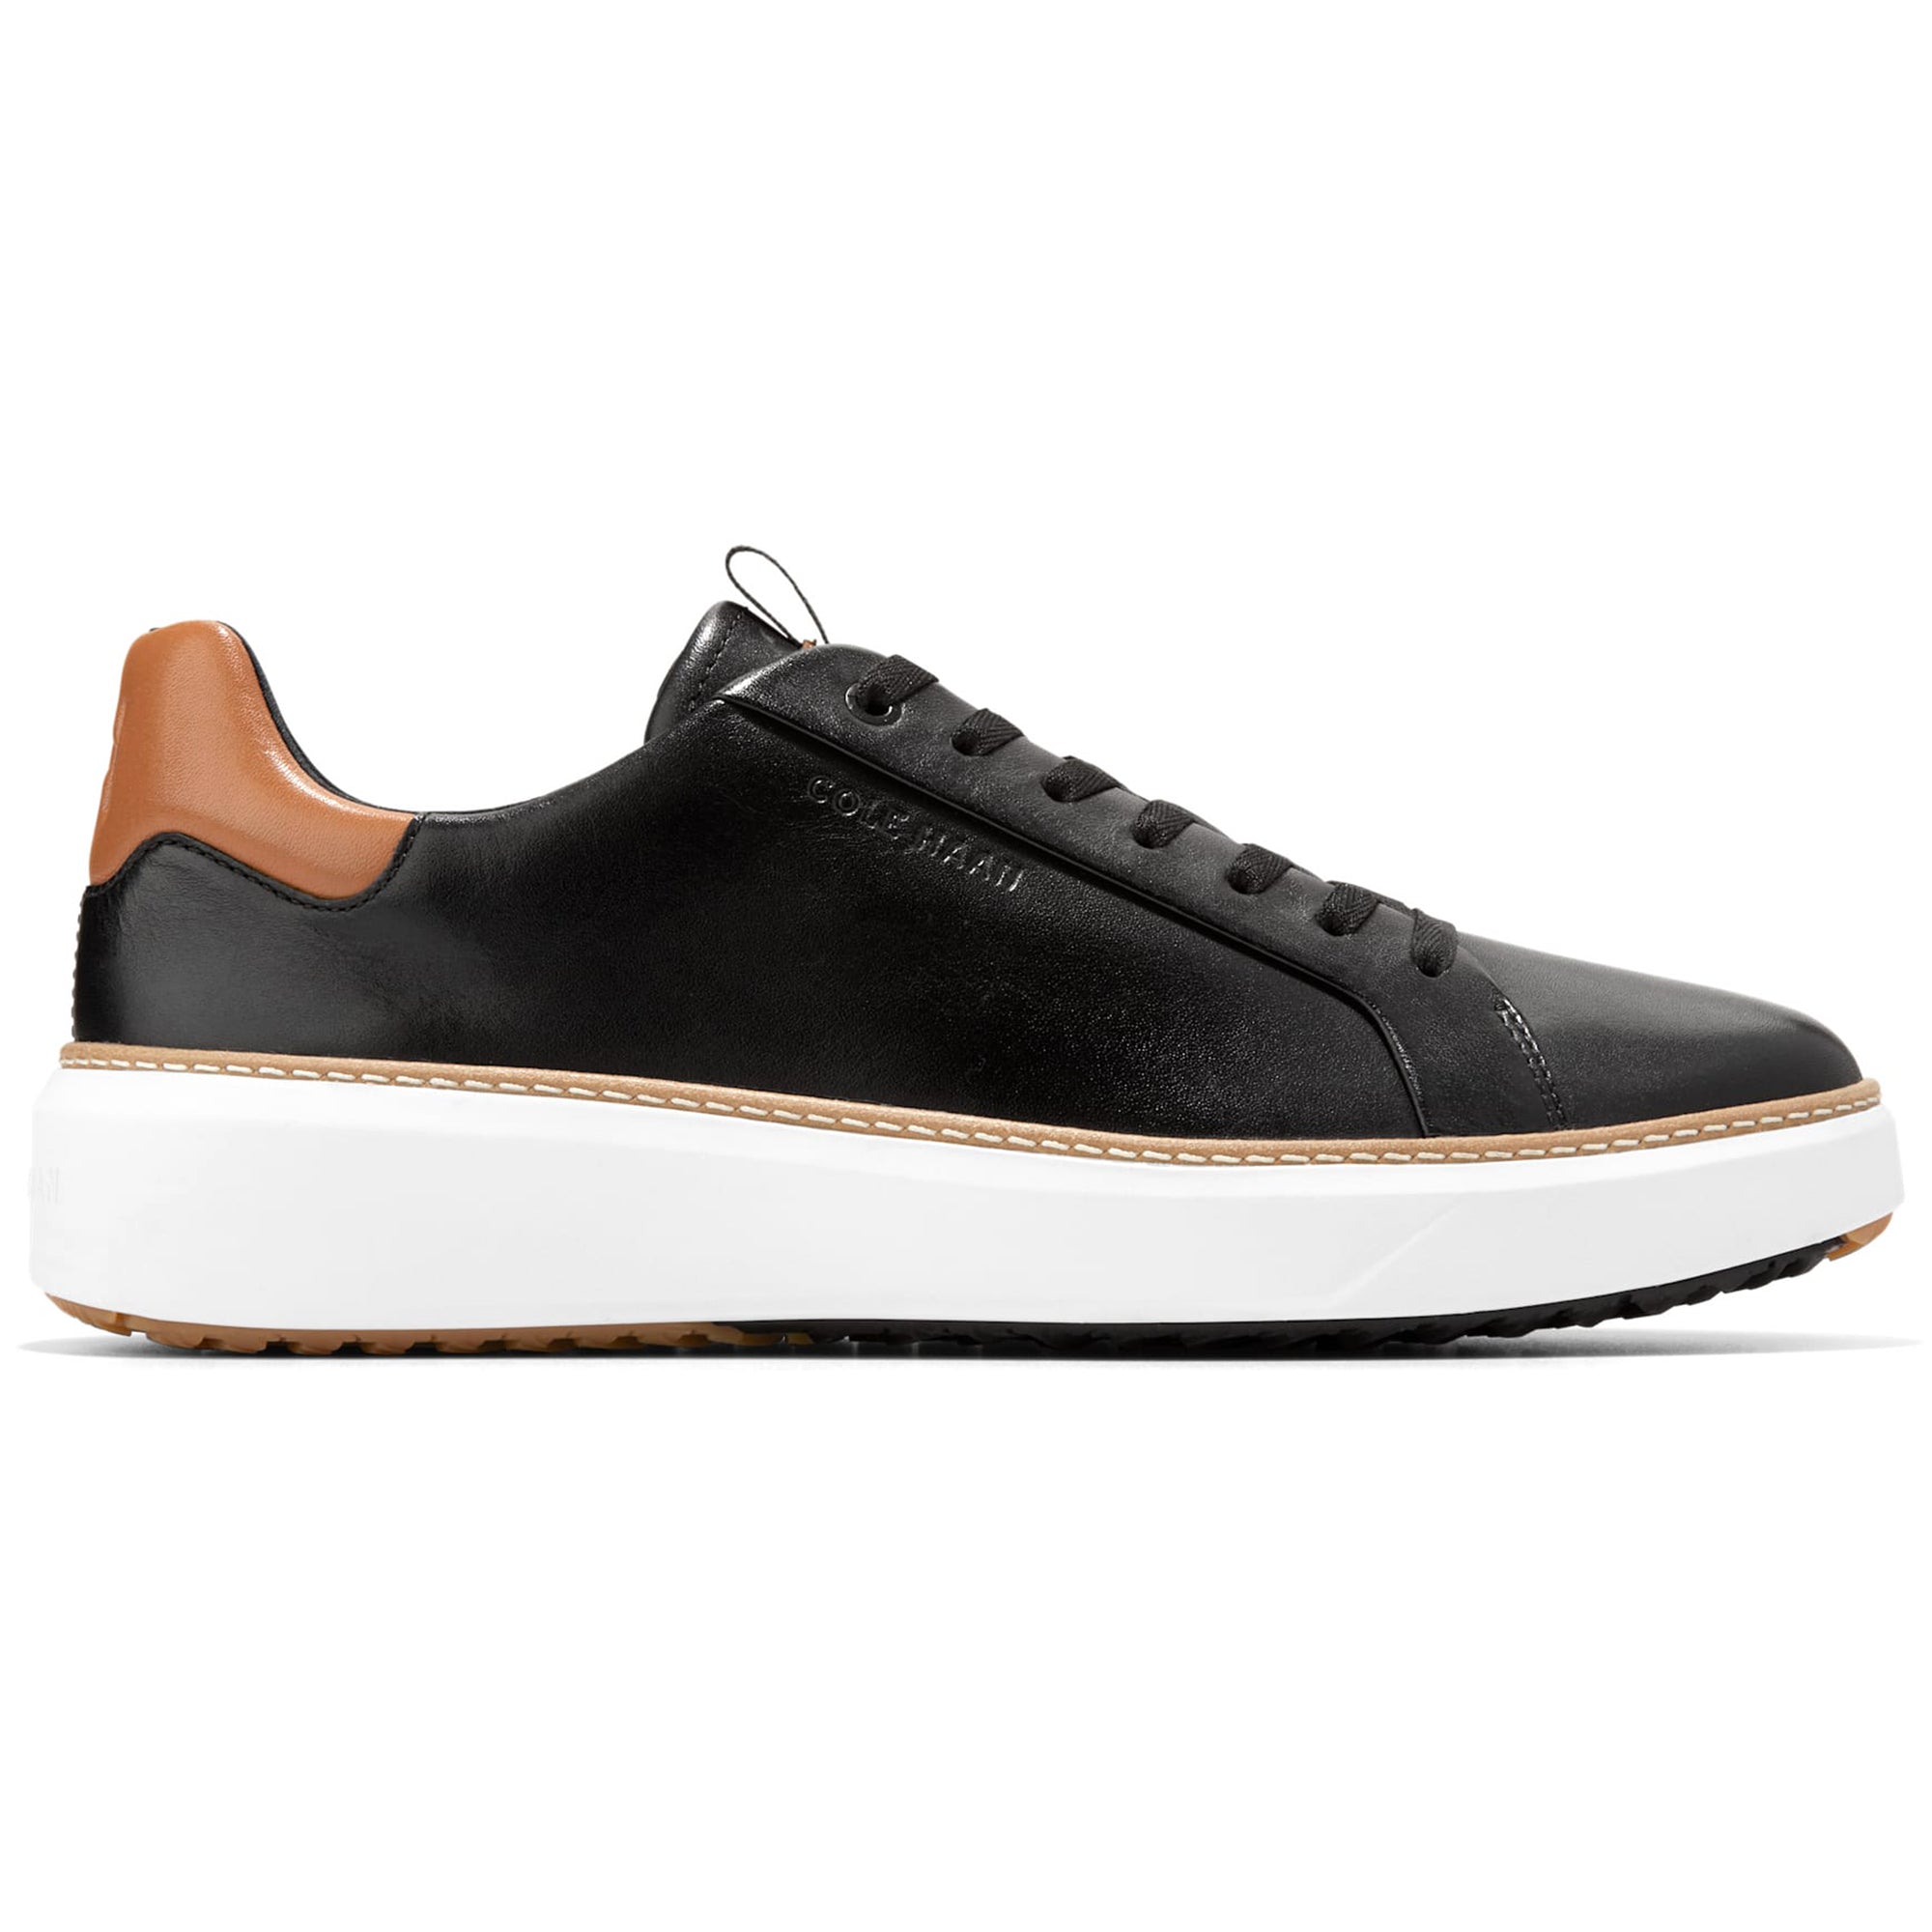 cole-haan-grandpro-topspin-golf-shoes-c38504-black-pecan-optic-white